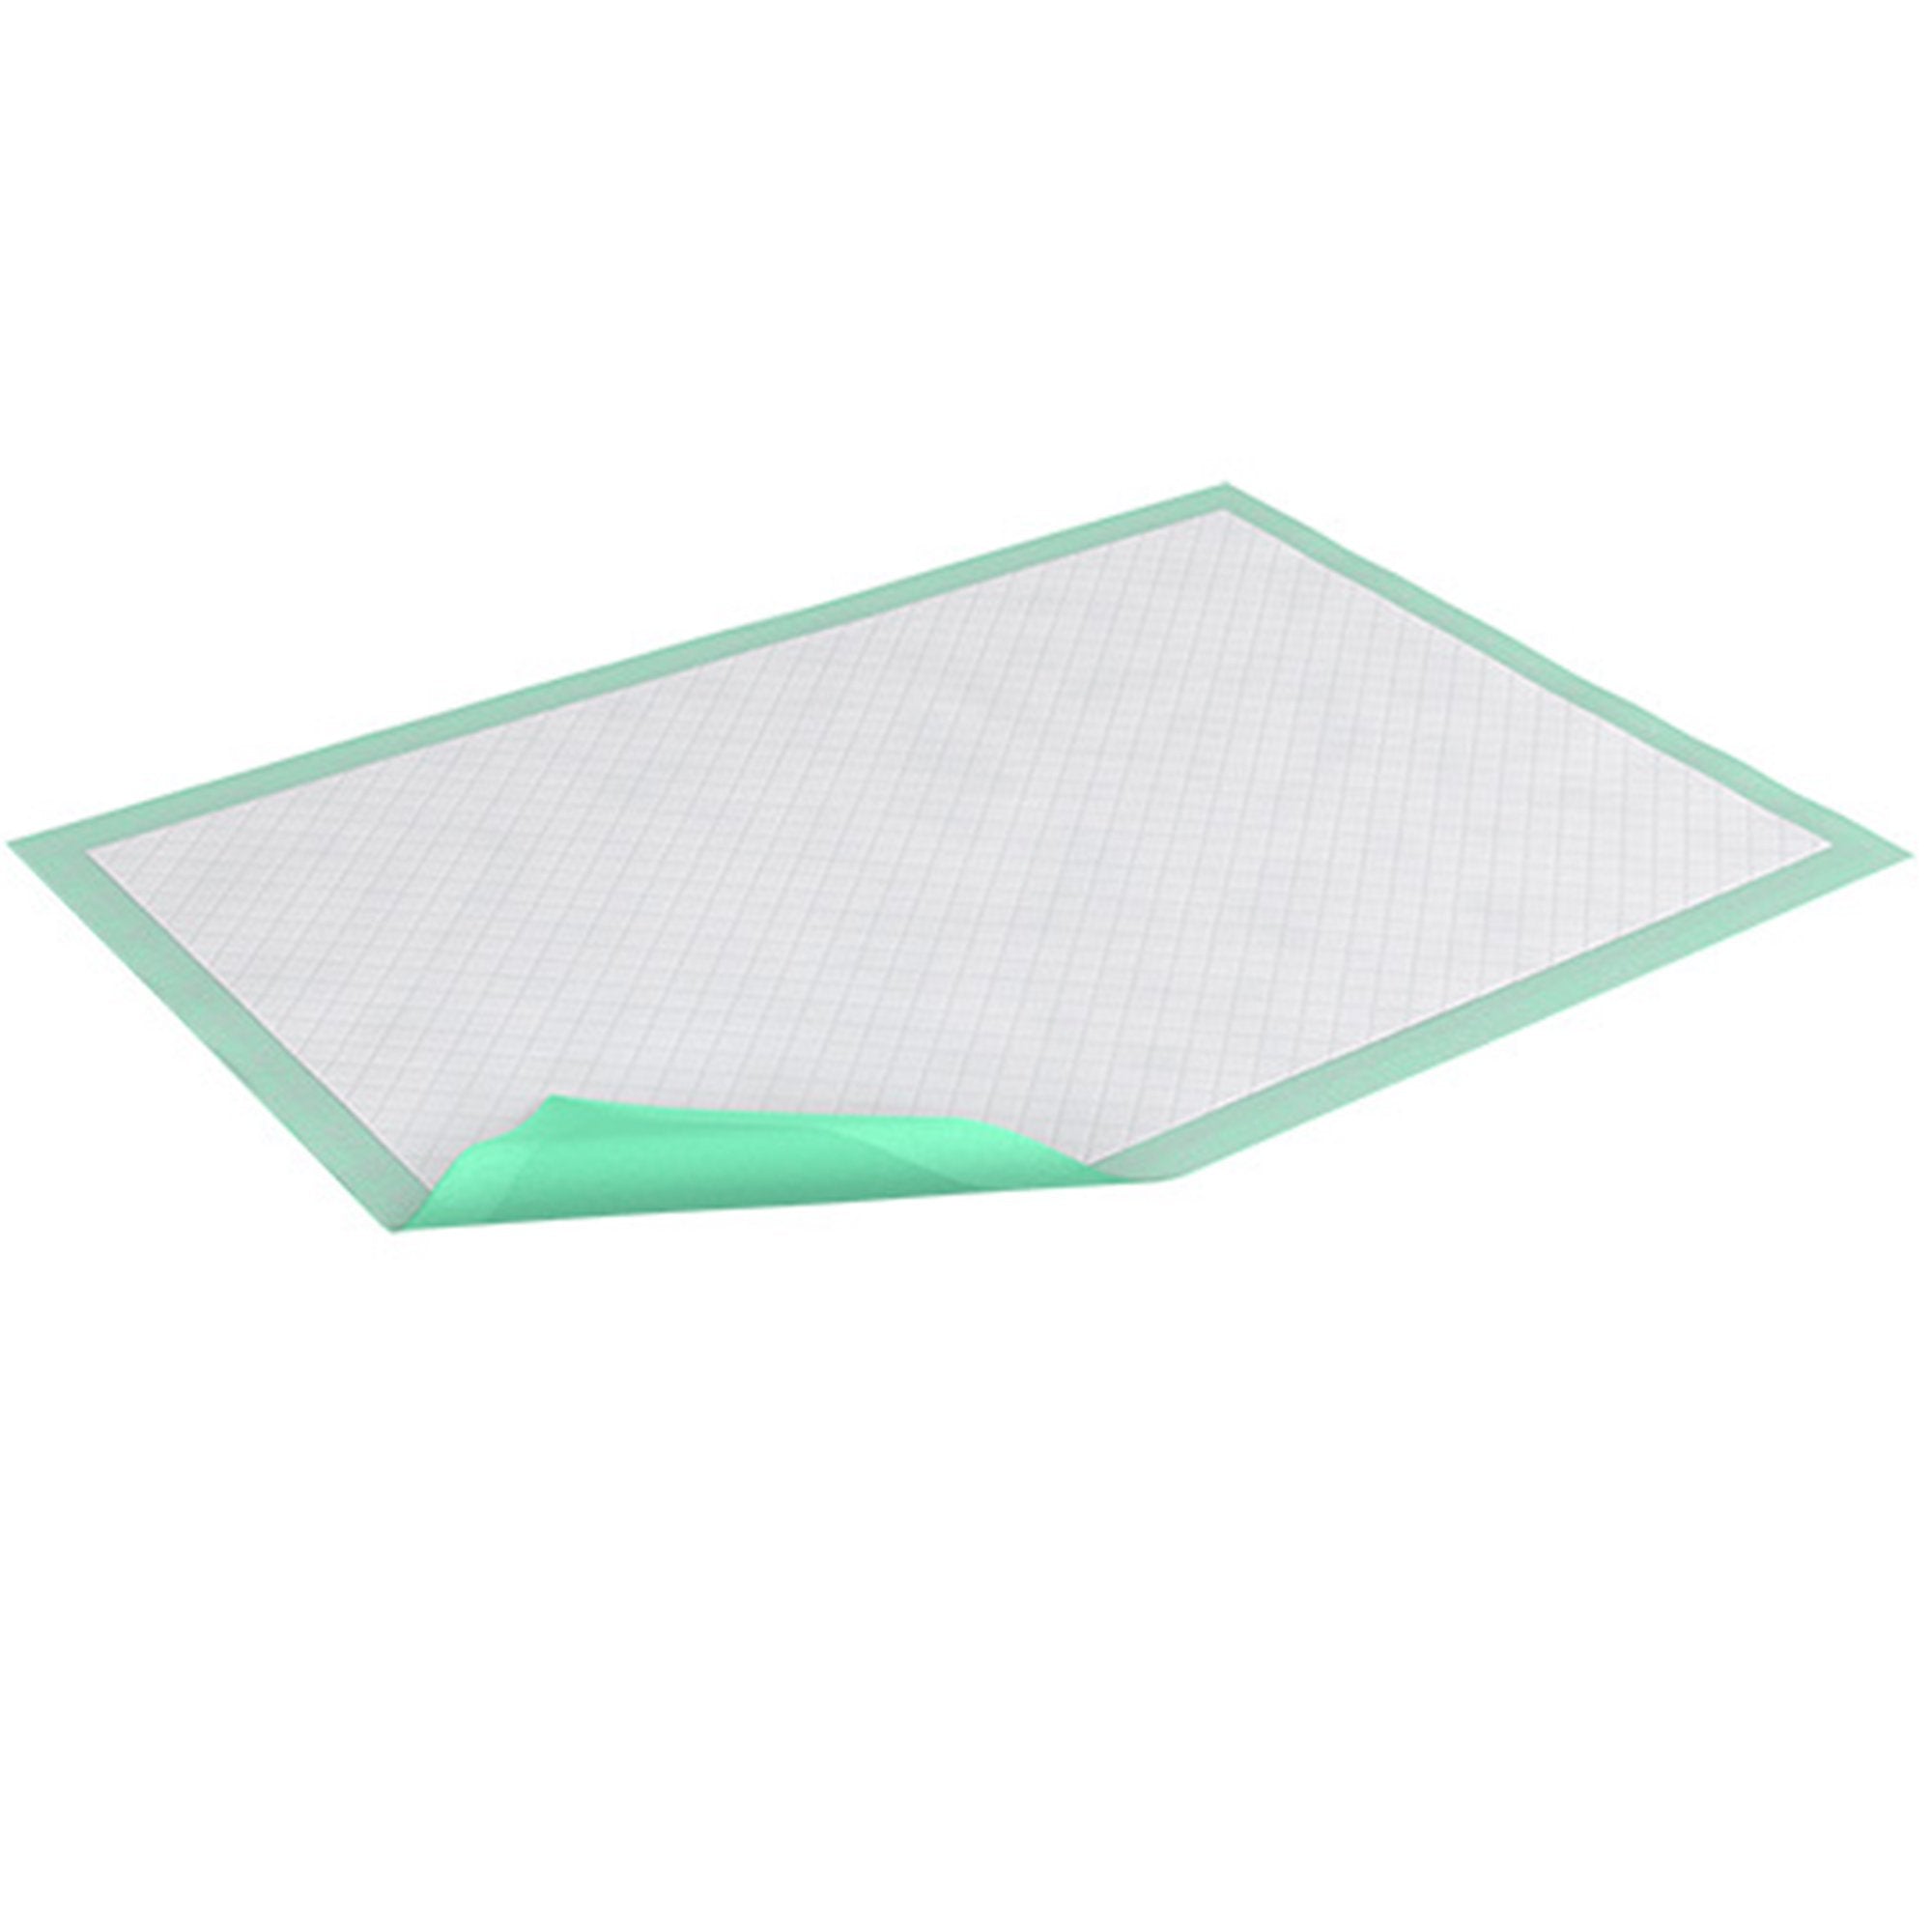 Disposable Underpad TENA Ultra Plus 30 X 30 Inch Super Absorbent Polymer Moderate Absorbency